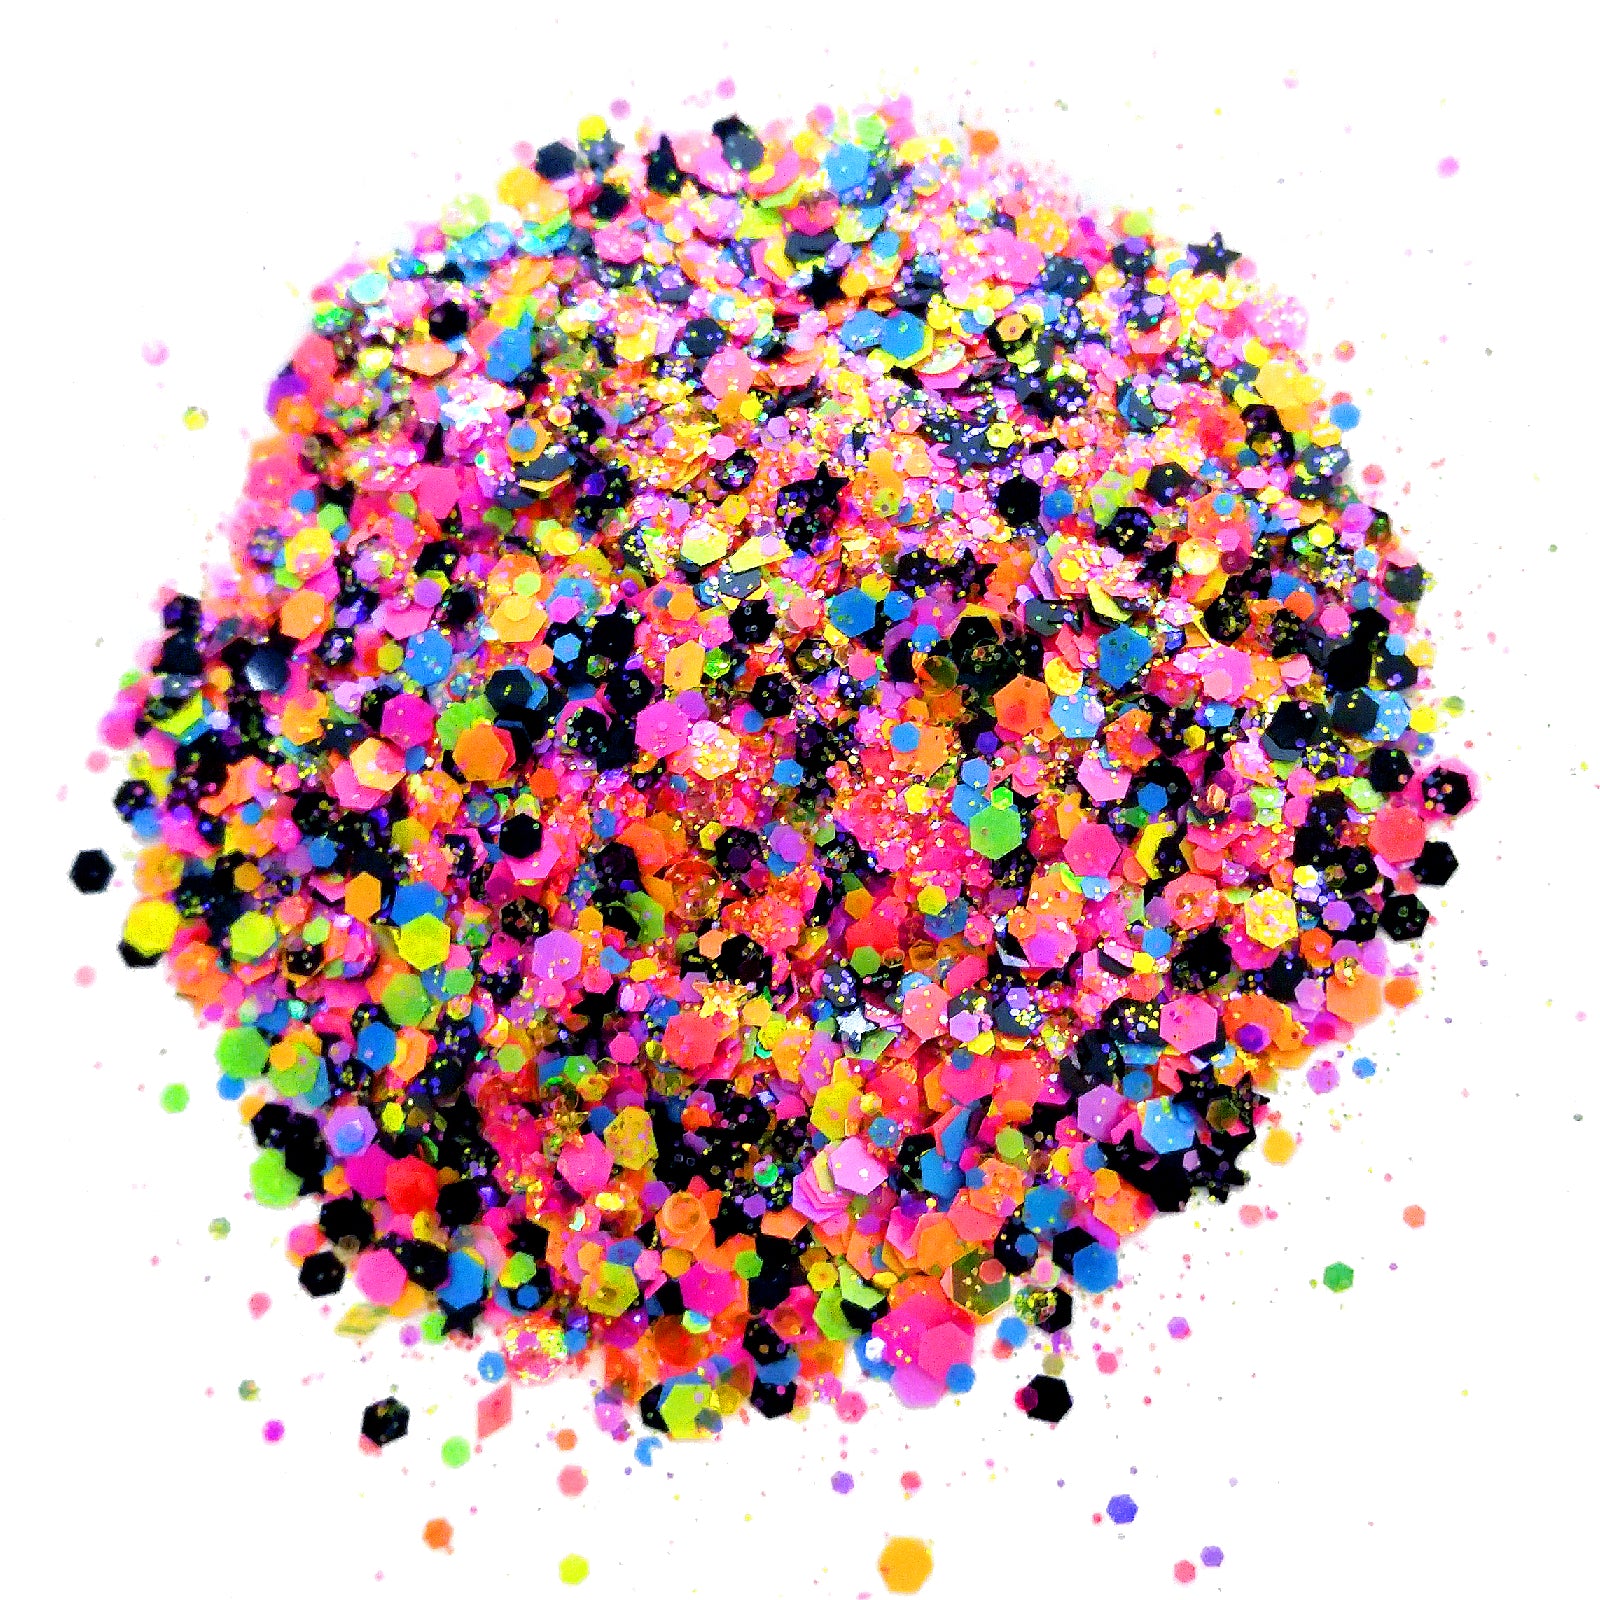 Neon and Black Chunky Glitter Mix - Rock The Microphone By Crazoulis Glitter